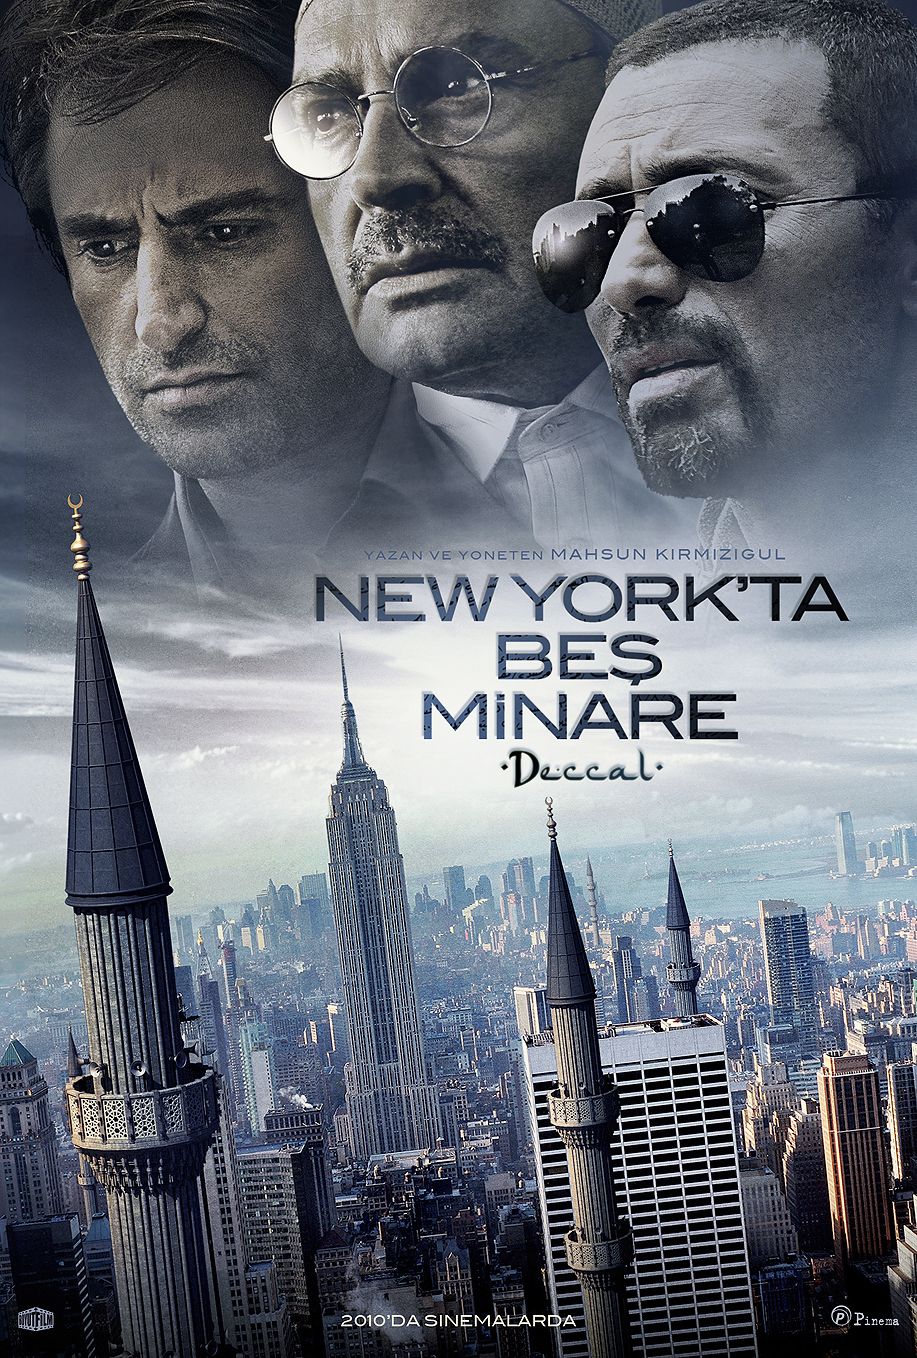 Extra Large Movie Poster Image for New York'ta Be? Minare (#2 of 6)